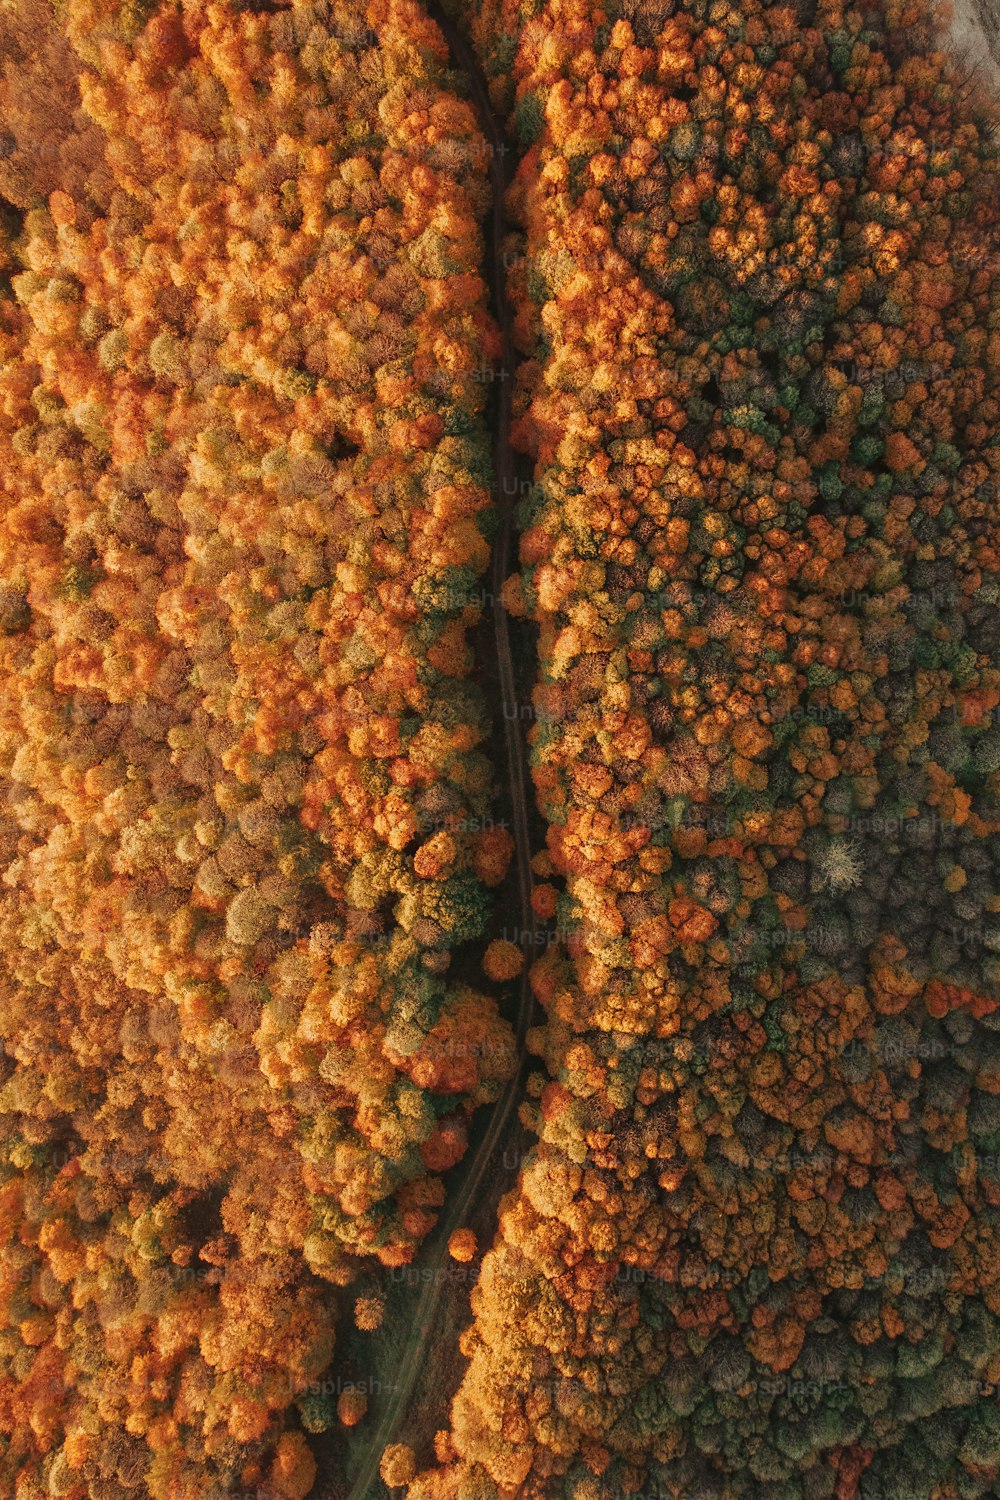 an aerial view of a tree with orange flowers